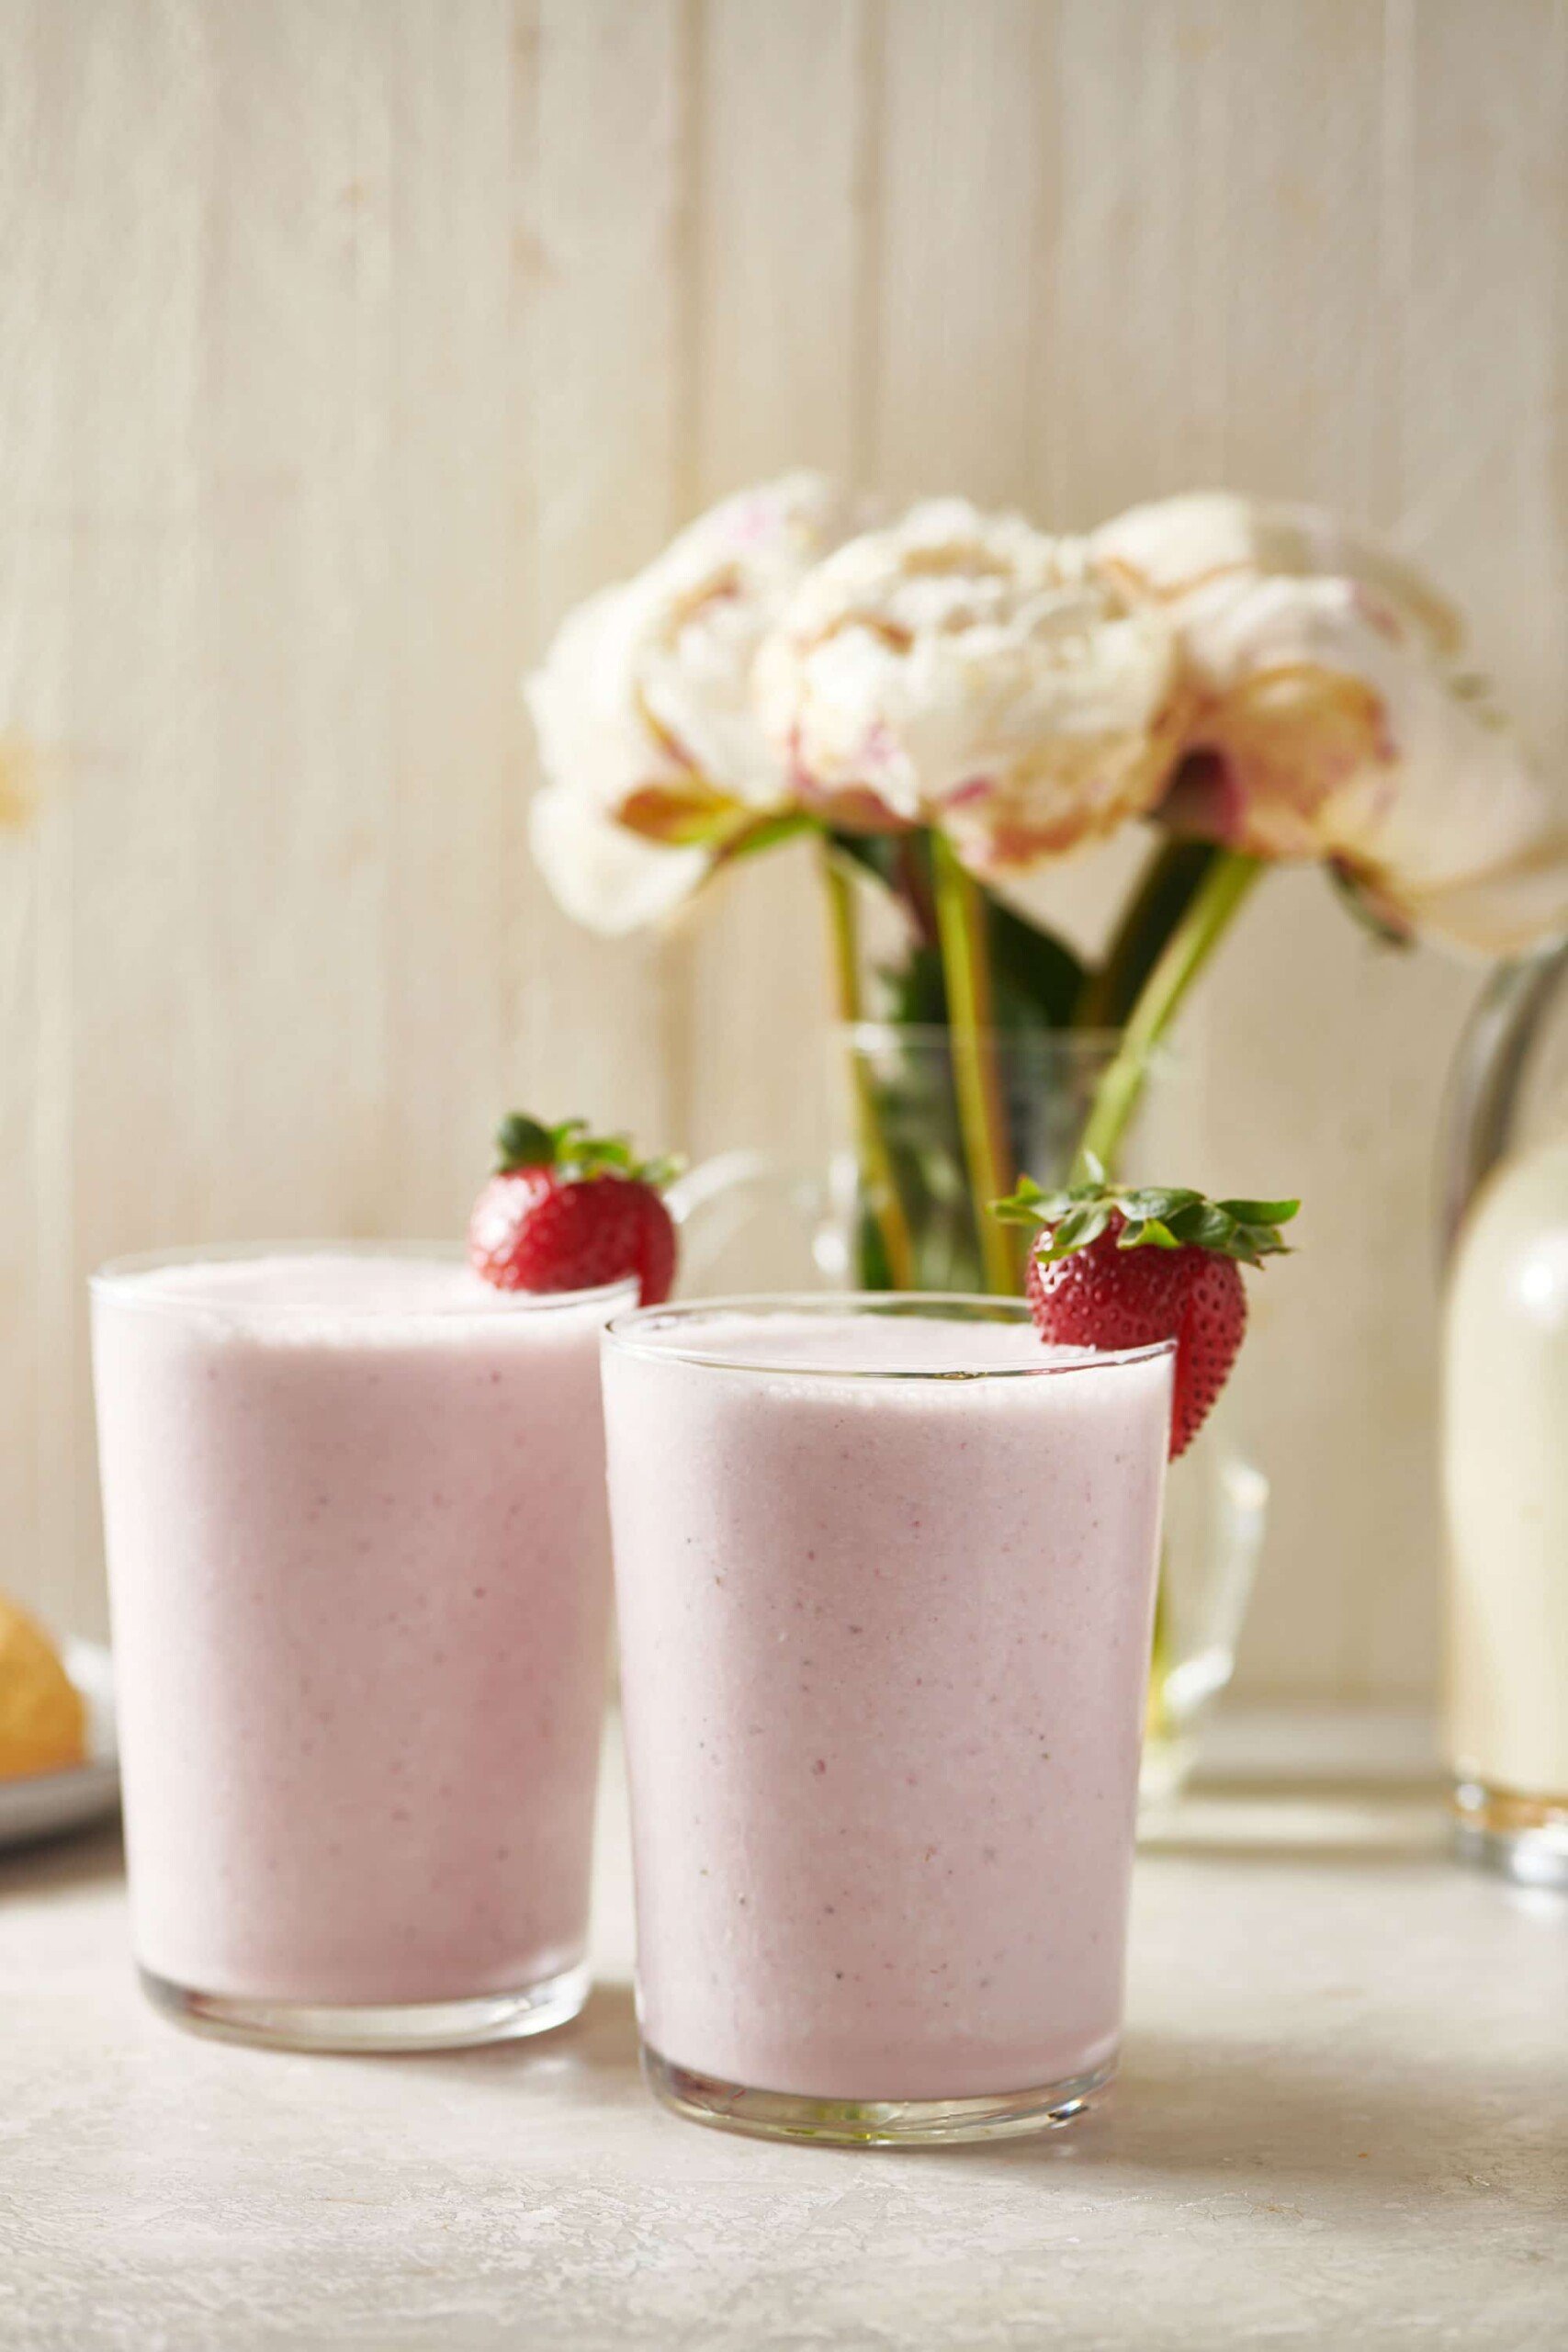 Two strawberry milkshakes on table with white flowers.